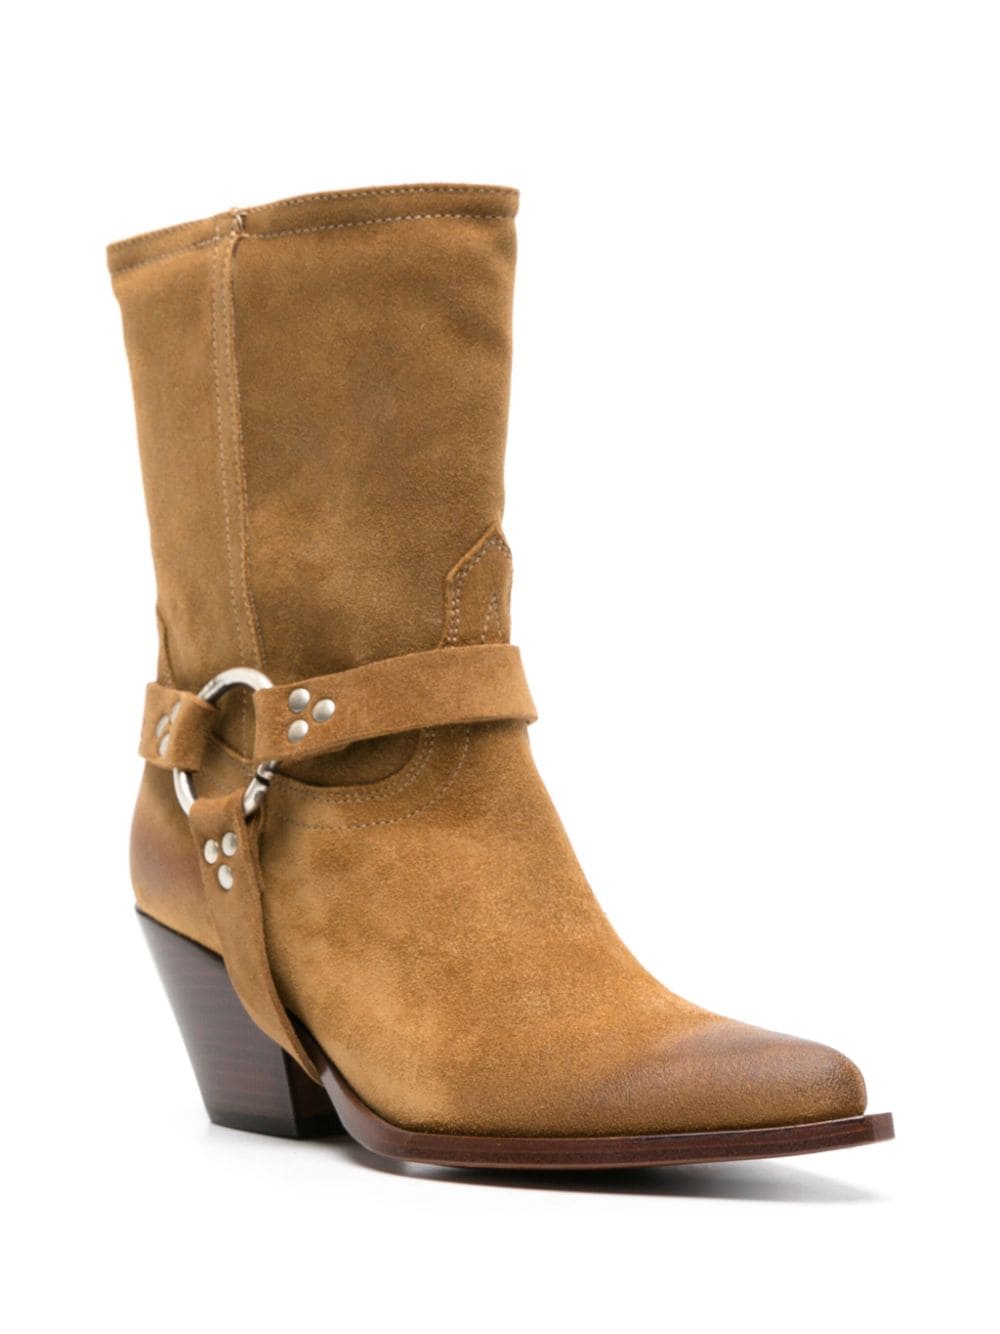 Sonora SONORA- Suede Texan Boots